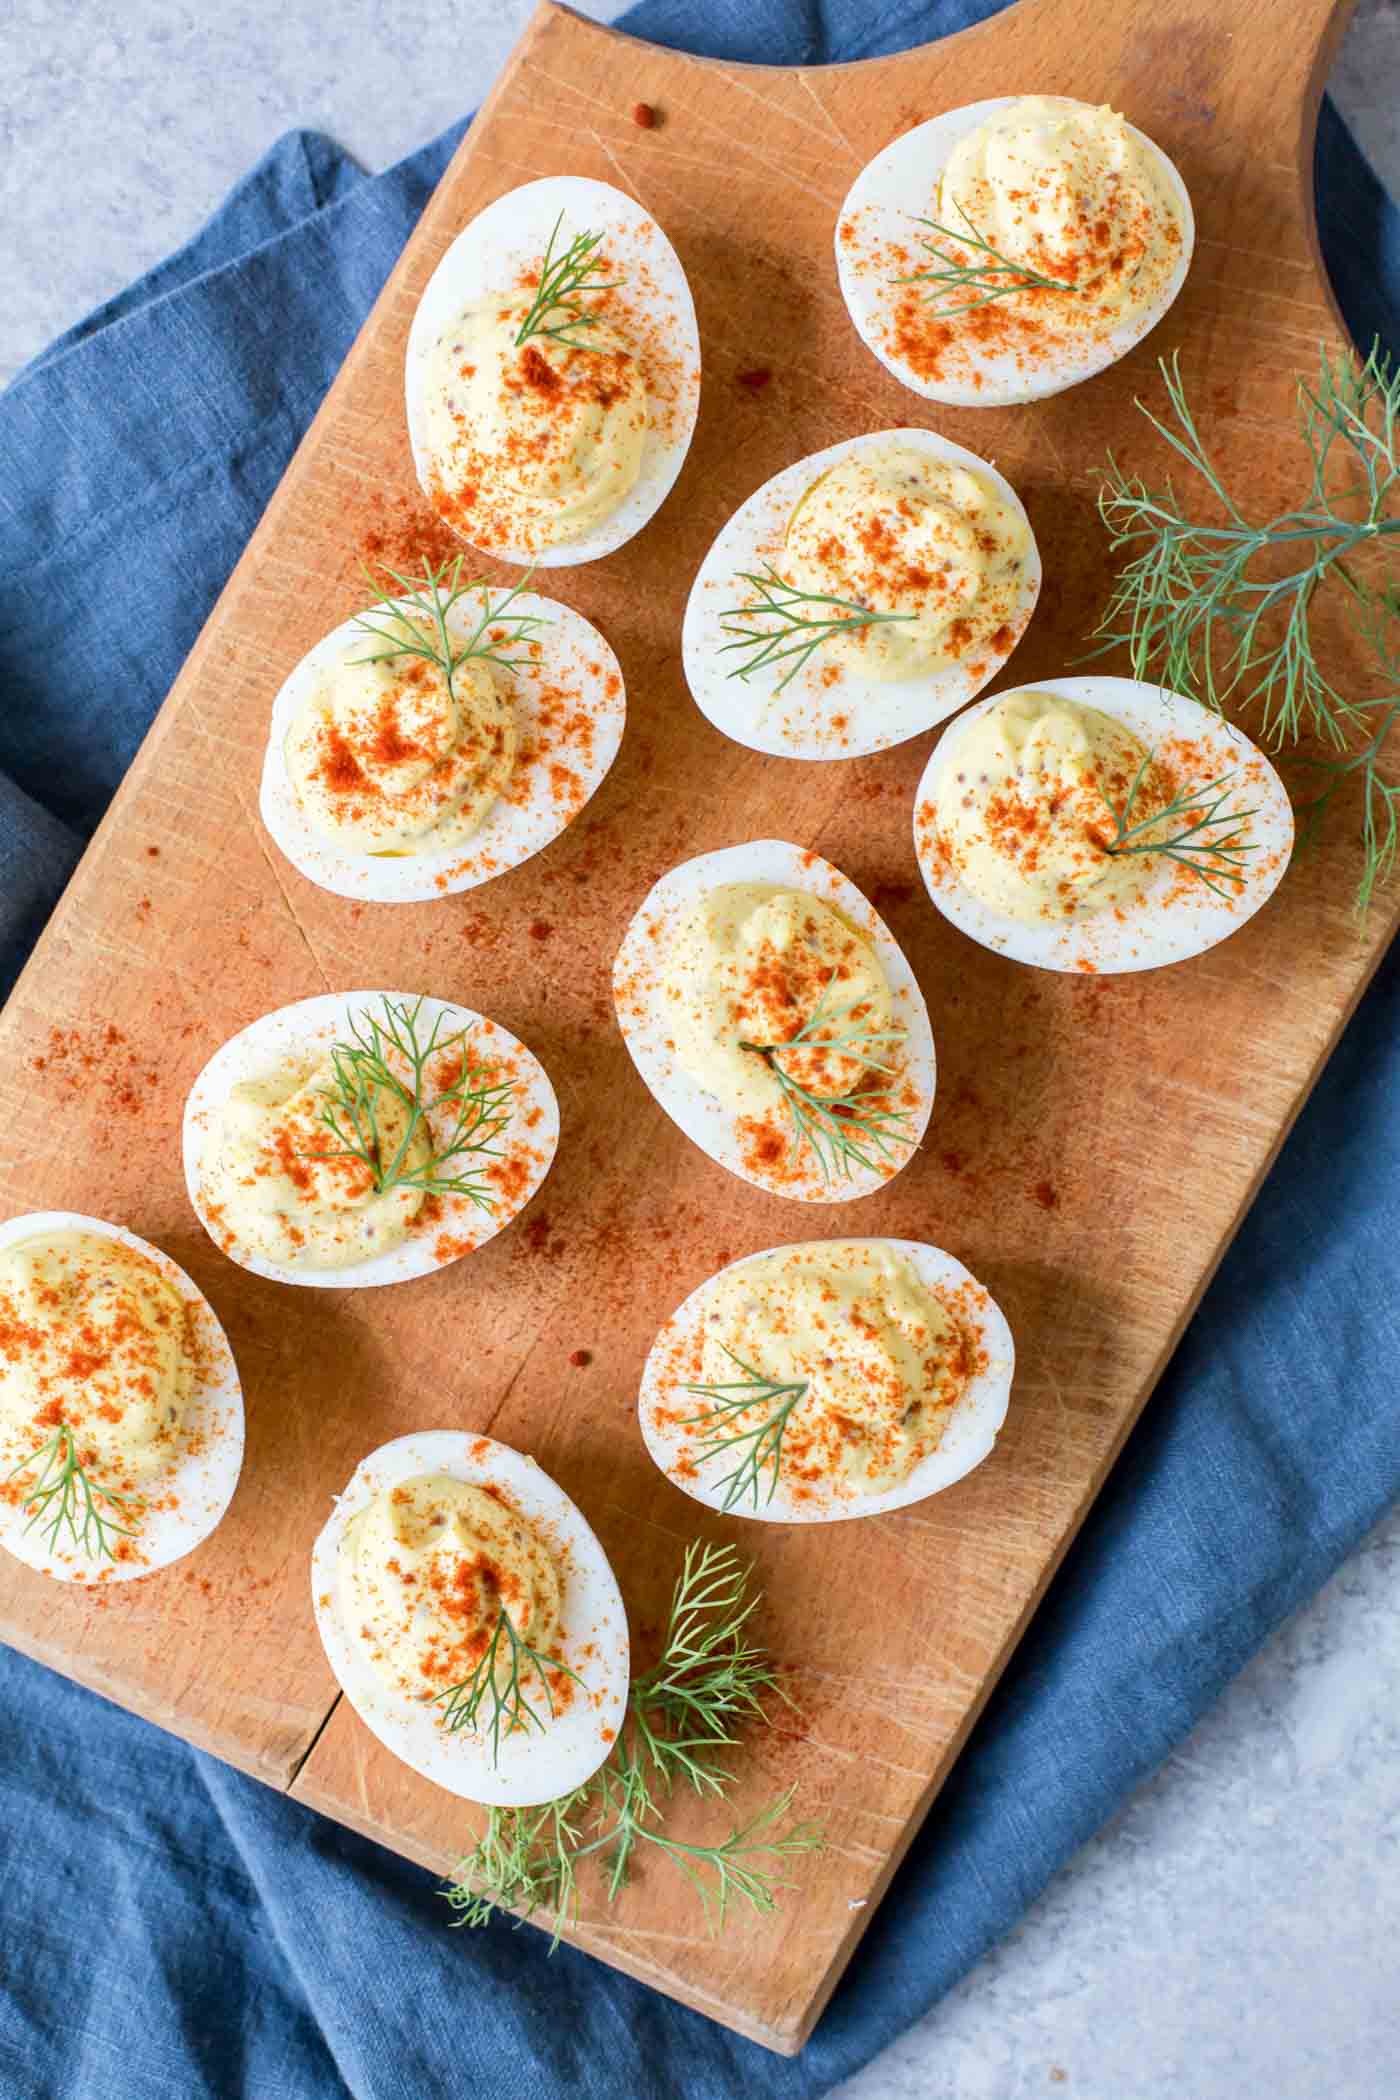 Deviled eggs with paprika and fresh dill garnish on a wood board.